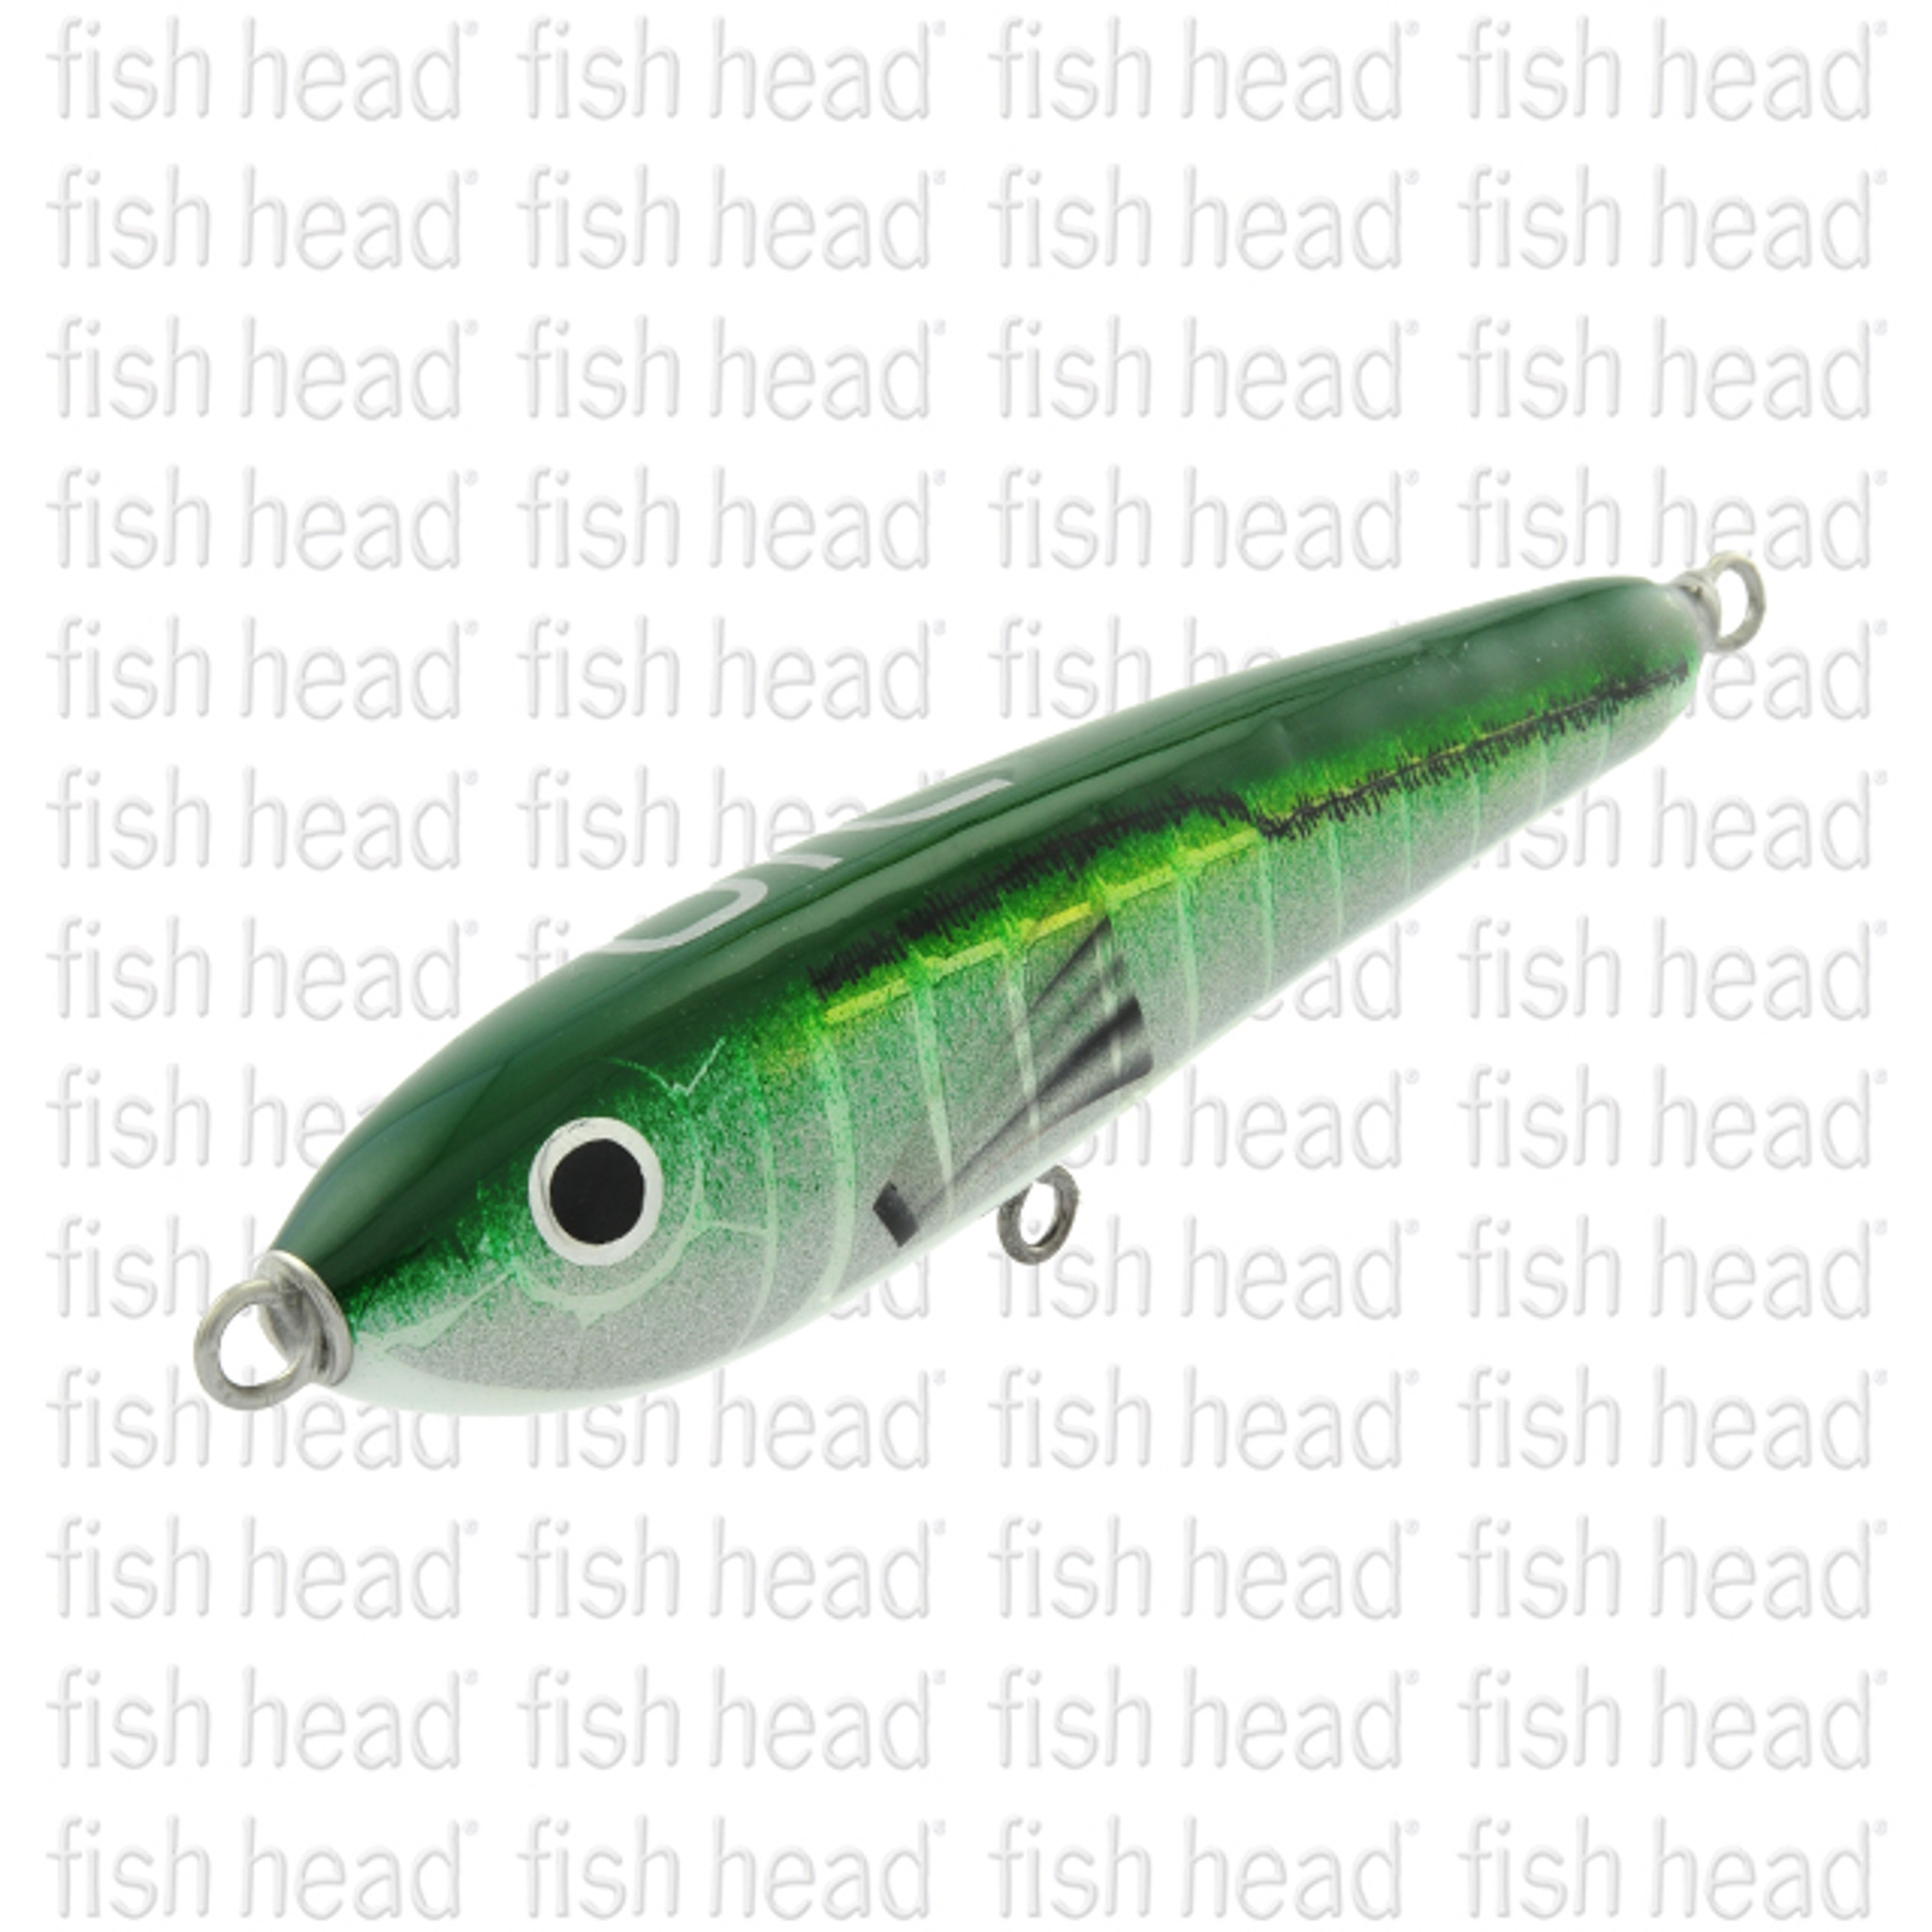 On Top Lures 75g Chop Floating Stickbait - Fish Head